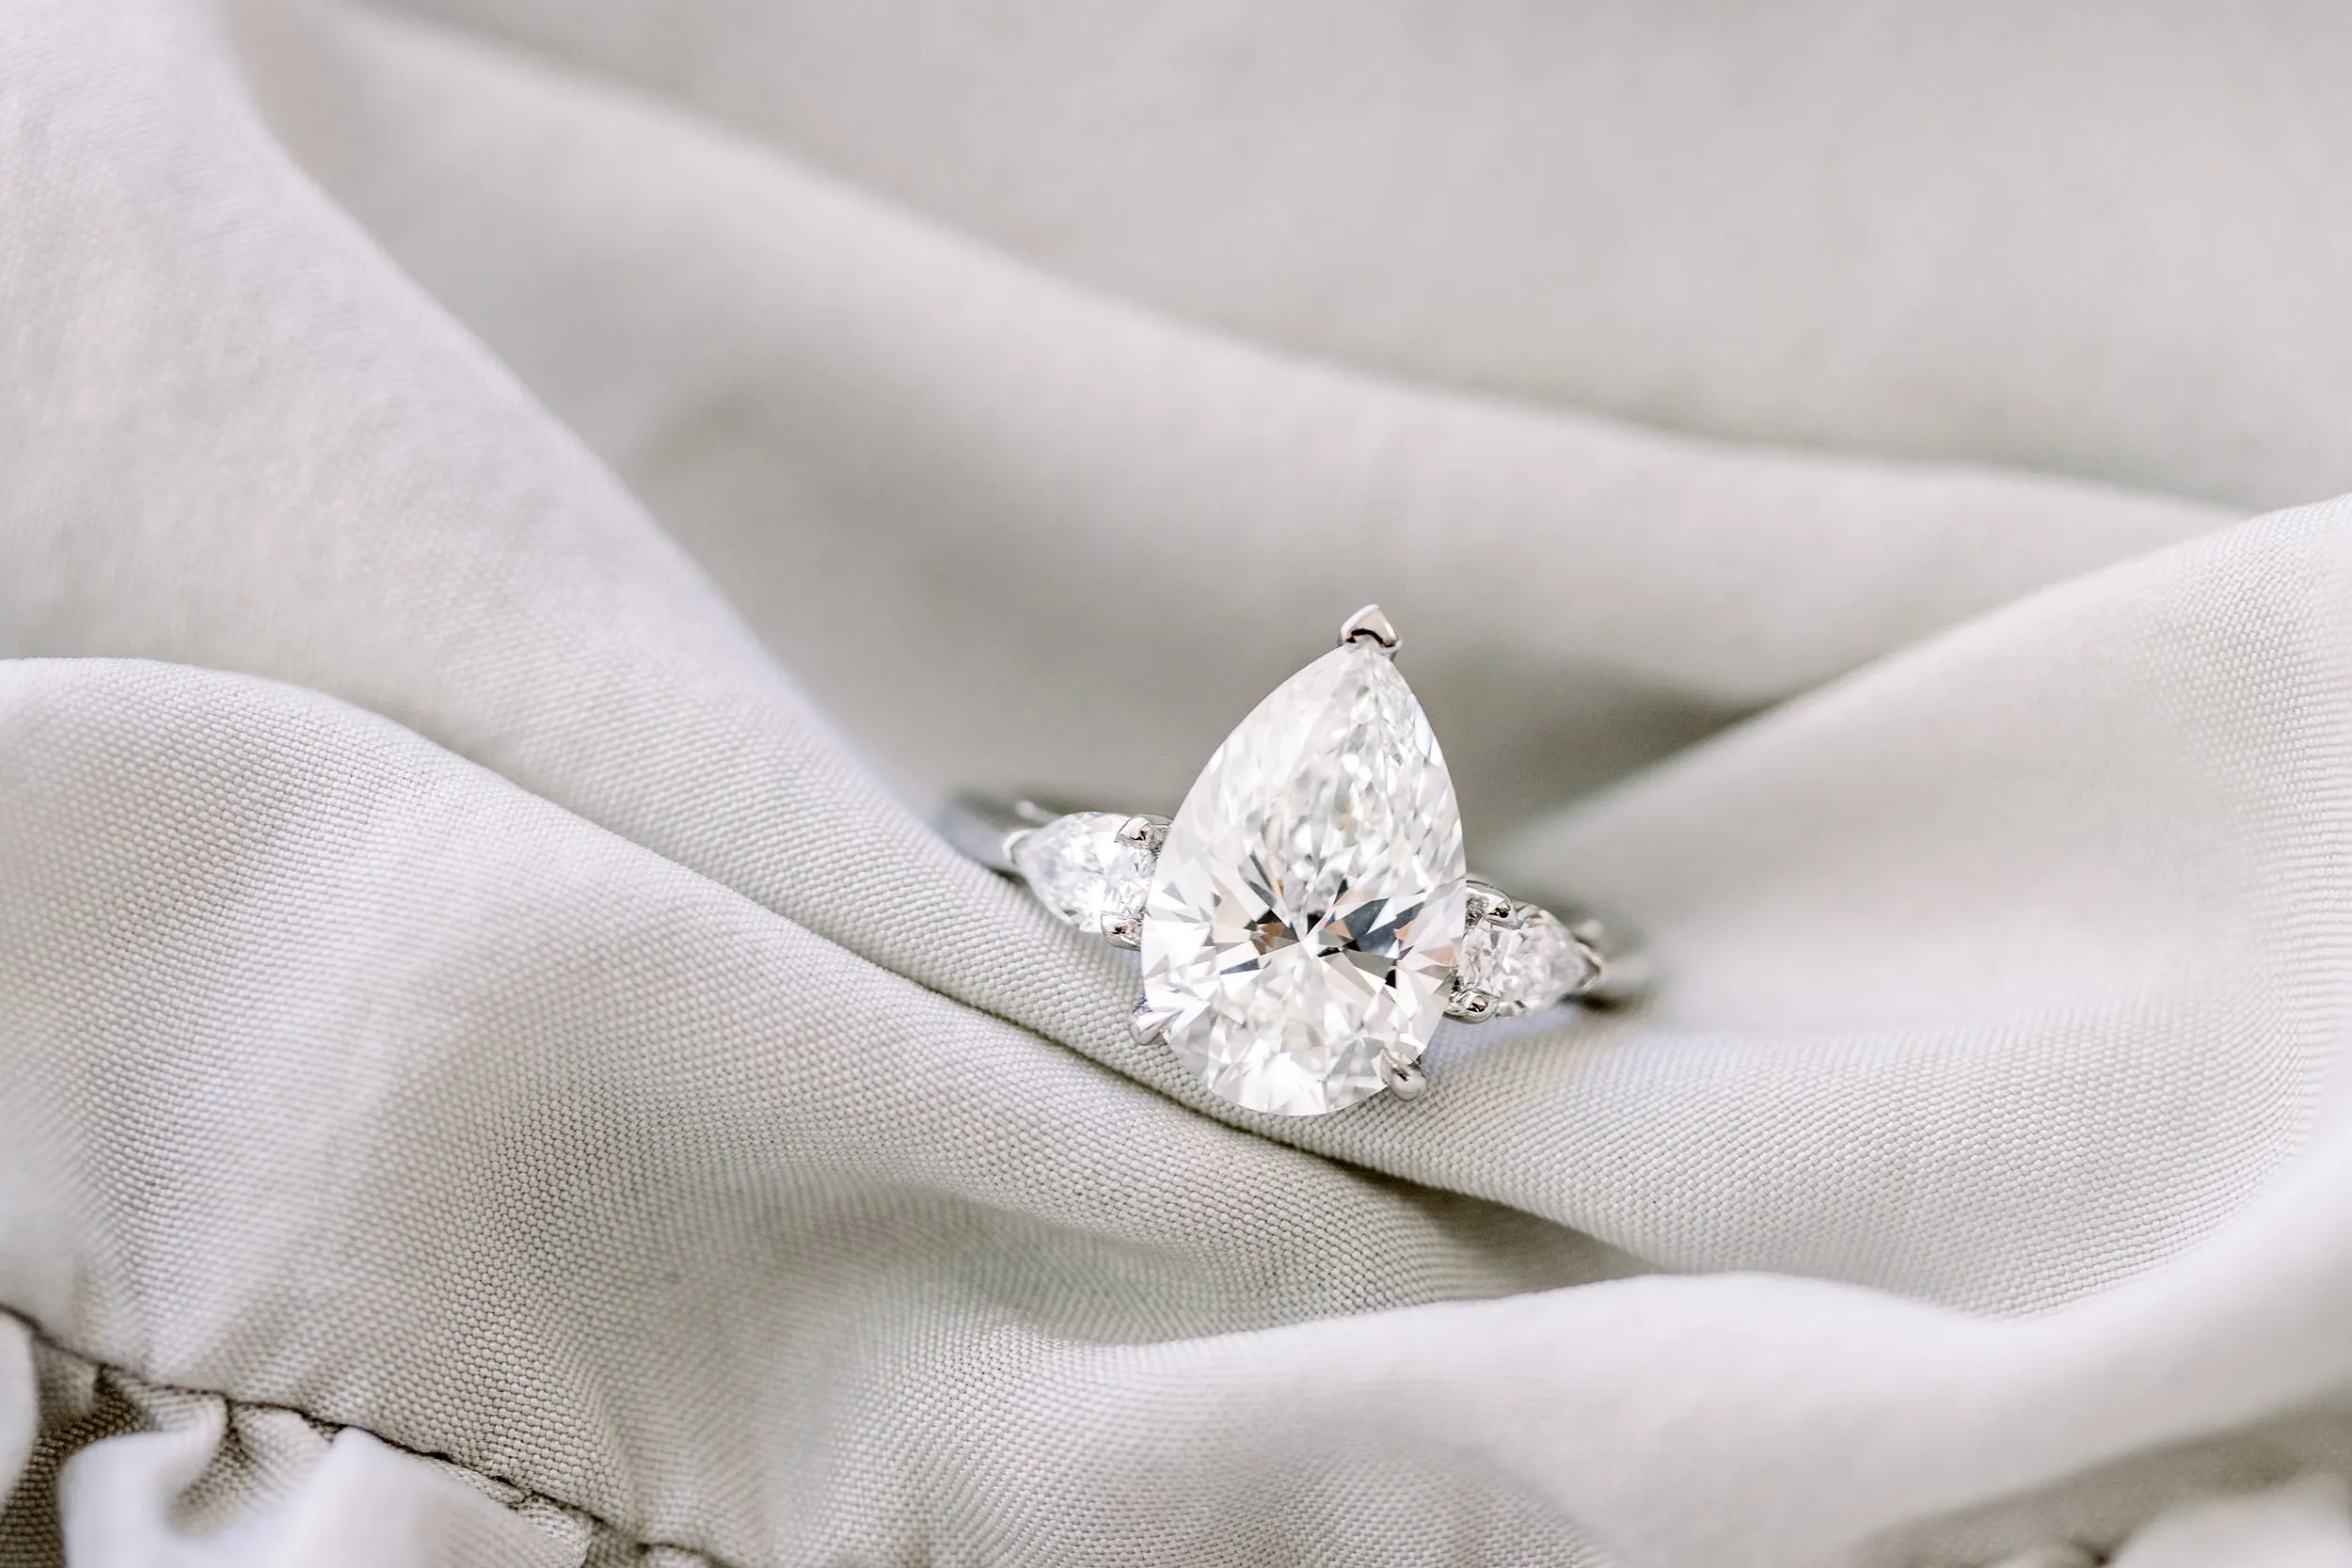 Lab Grown Diamonds The #1 Choice for Ethical Elegance